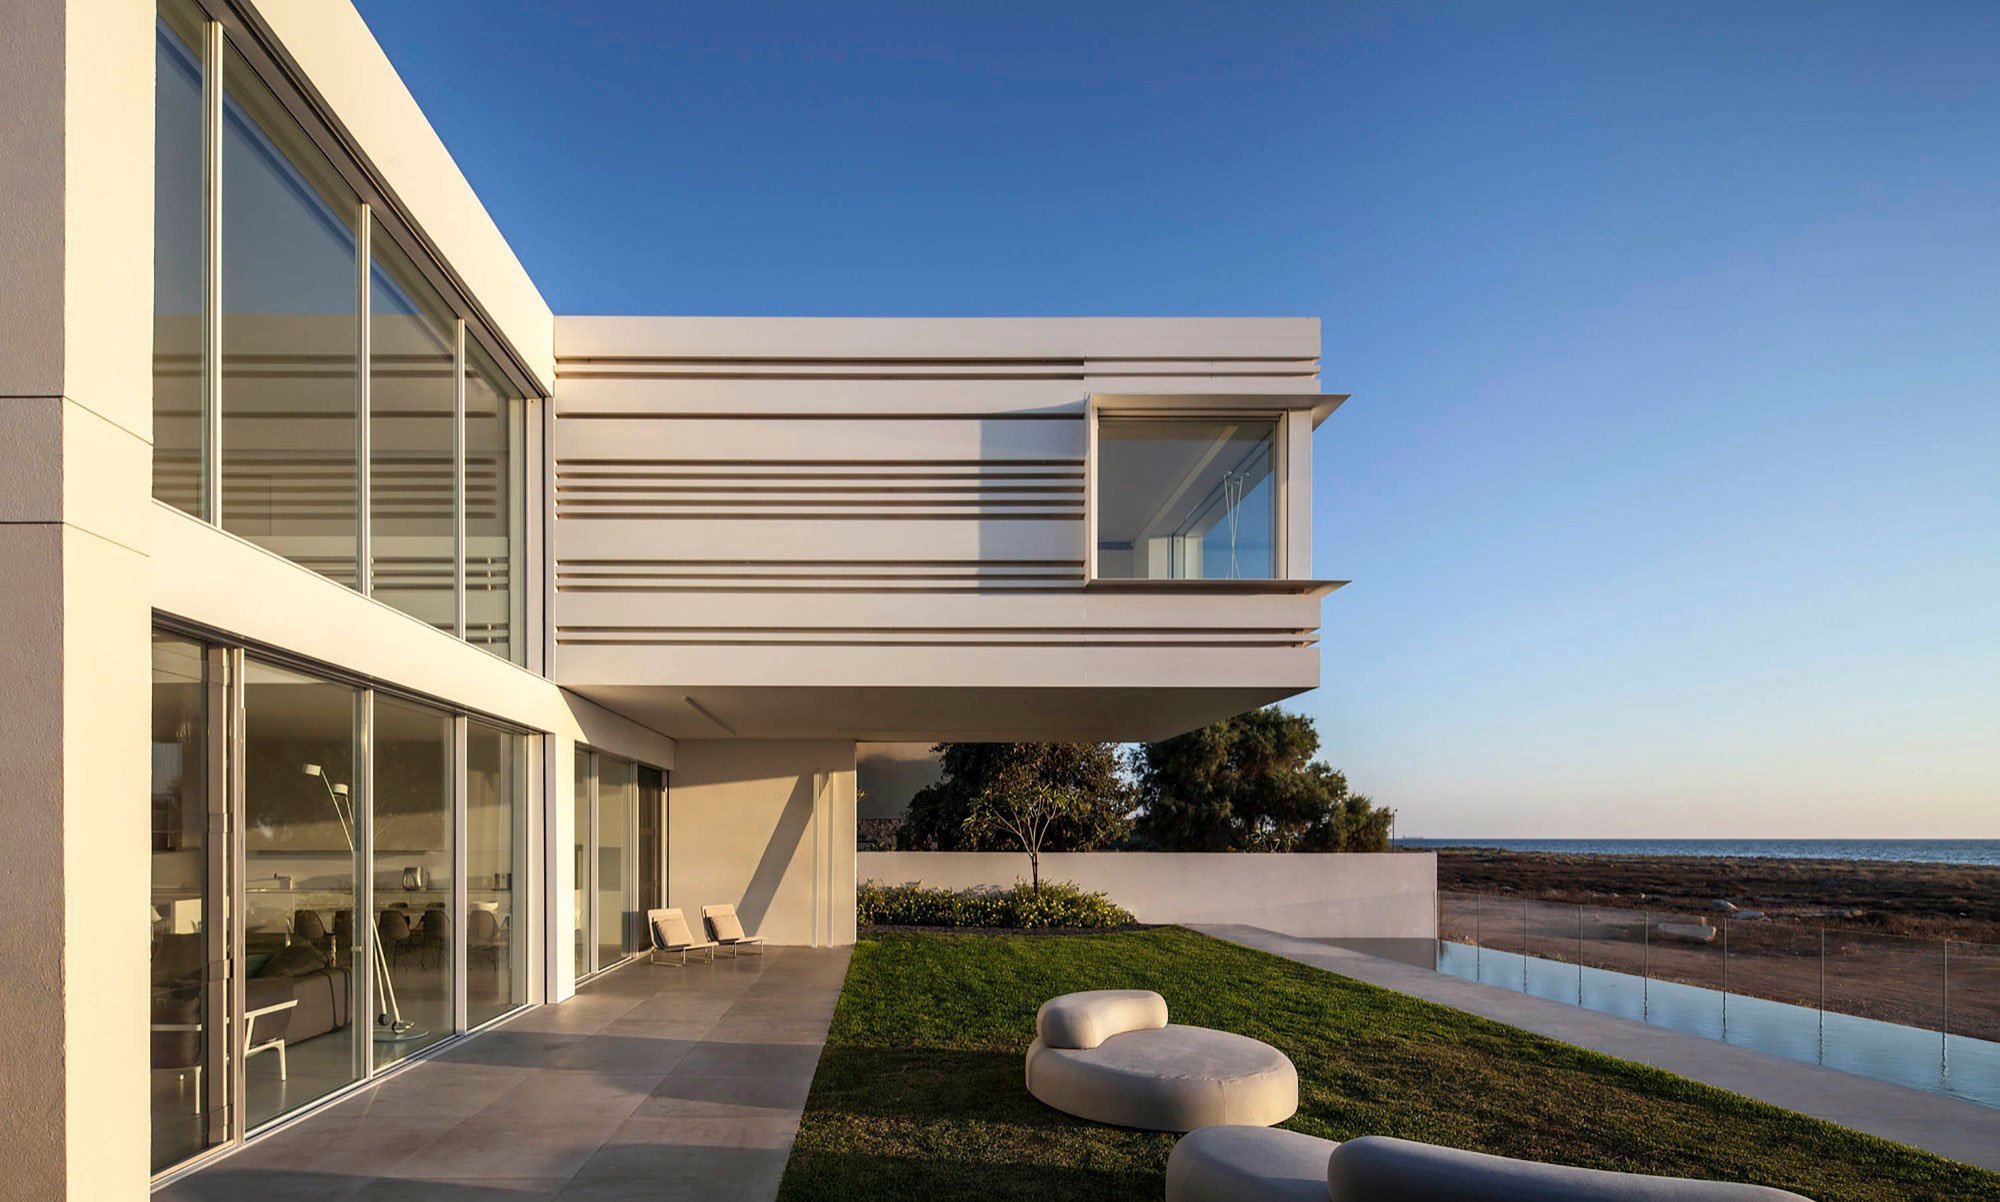 Luminous A House by the Sea home with Mediterranean Sea views by Pitsou Kedem Architects-21